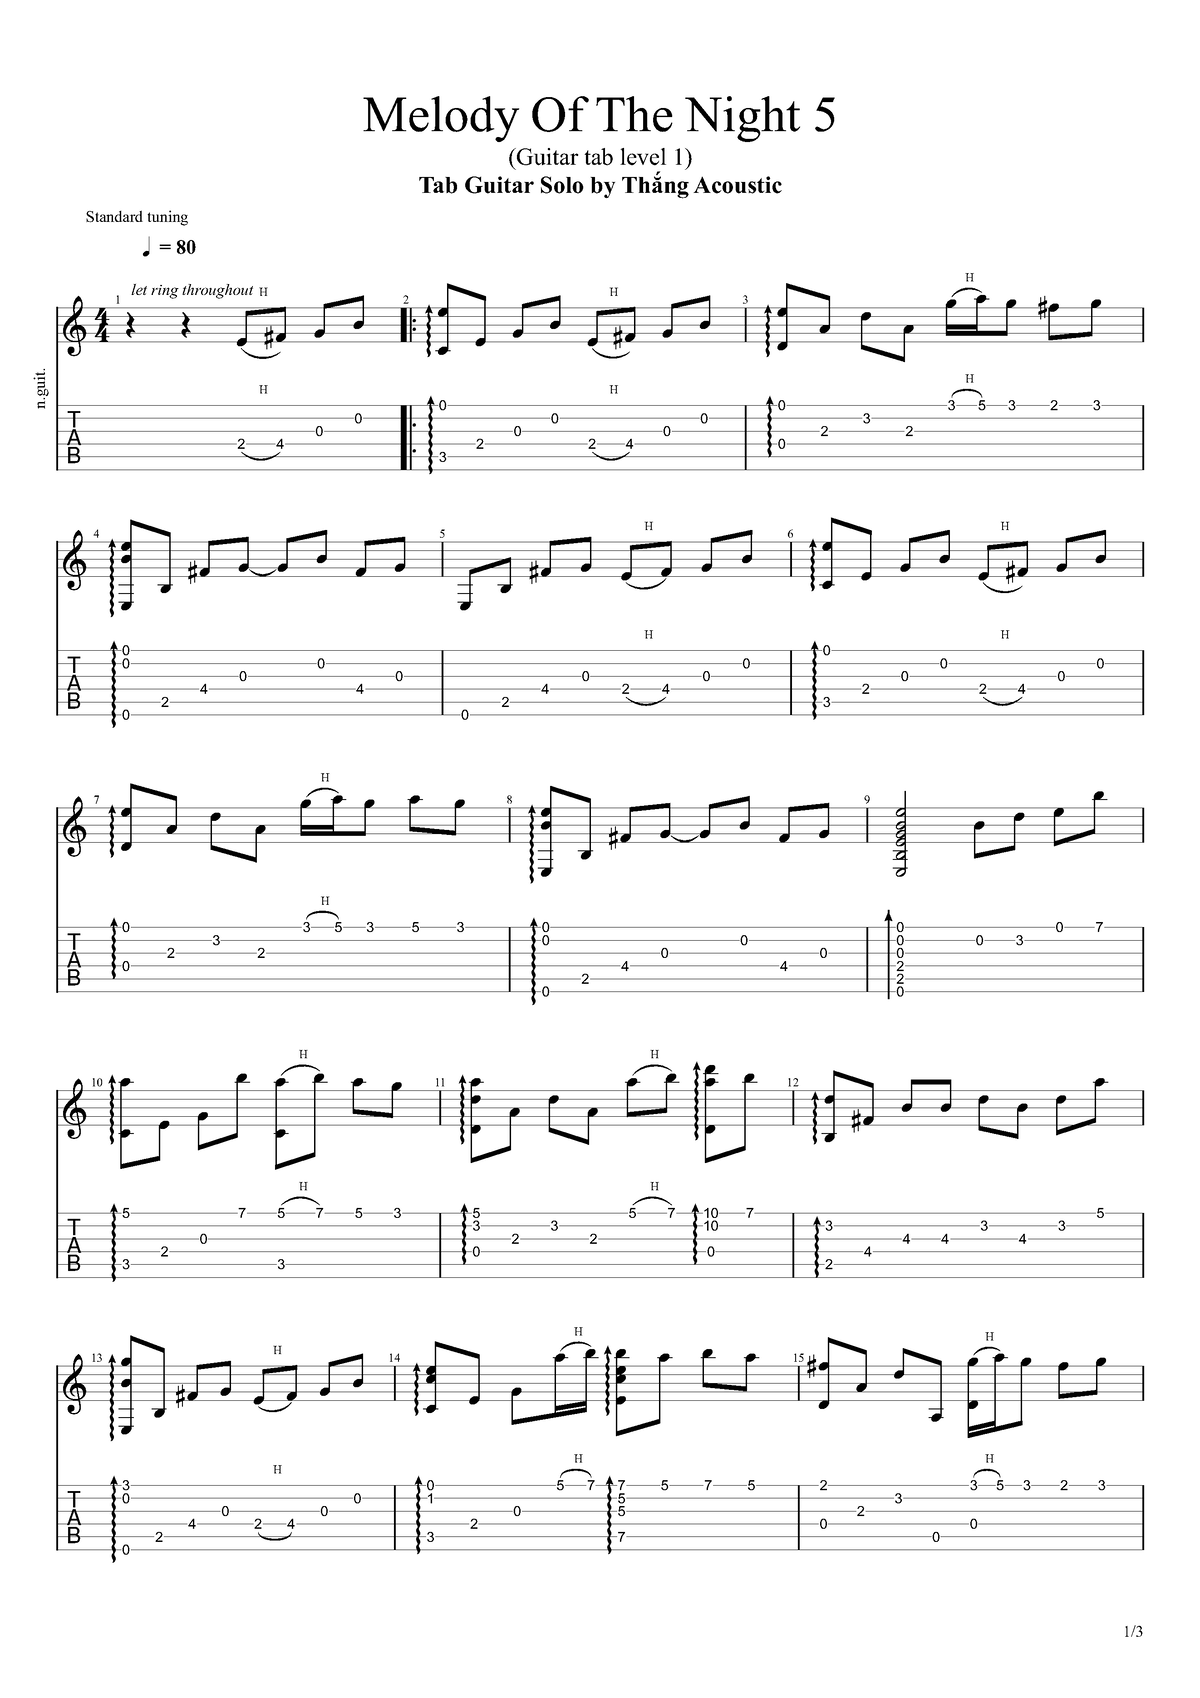 Melody Of The Night 5 - Tab - Melody Of The Night 5 (Guitar Tab Level 1)  Tab Guitar Solo By Thắng - Studocu